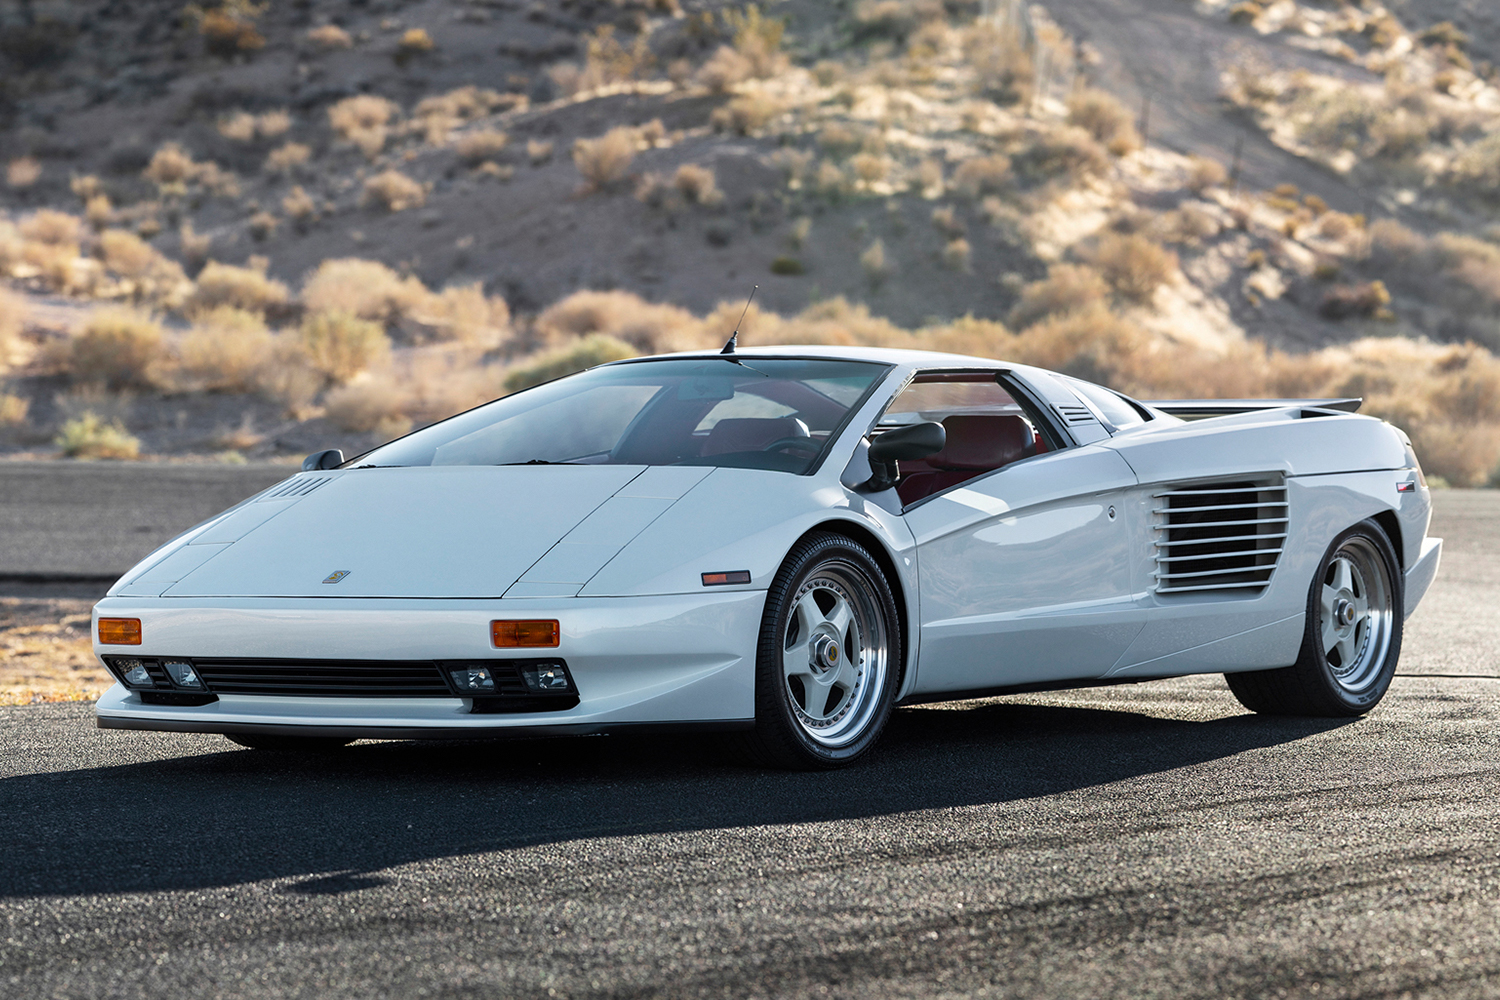 The 1988 Cizeta-Moroder V16T, a prototype supercar owned by Giorgio Moroder that's headed to auction at RM Sotheby's in January 2022